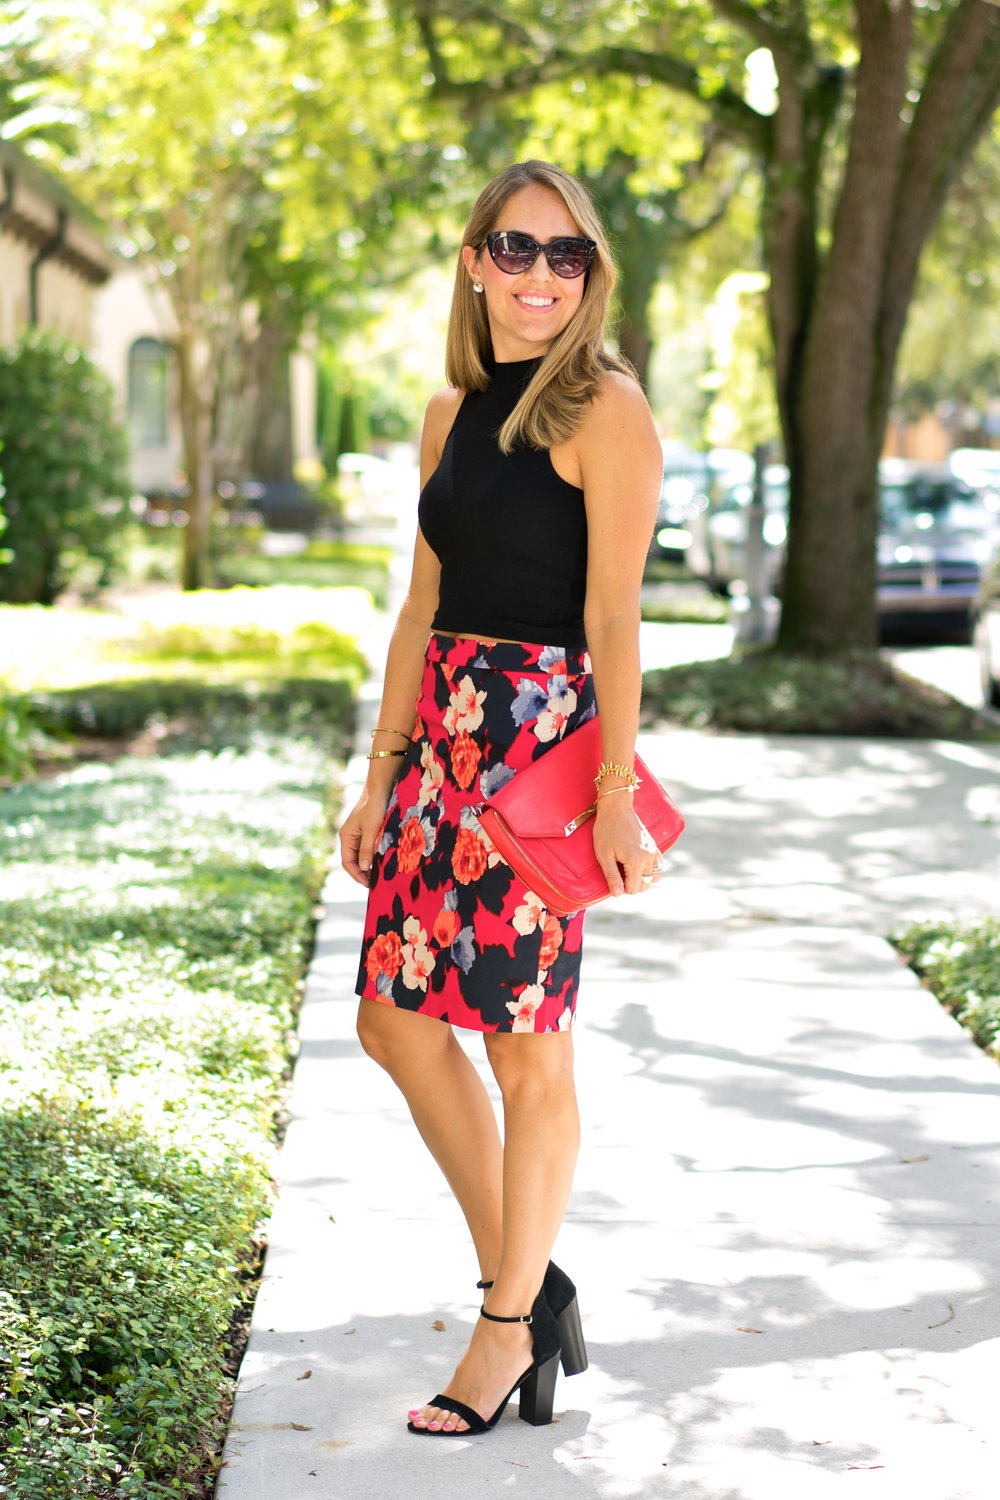 Today's Everyday Fashion: Floral Pencil Skirt — J's Everyday Fashion